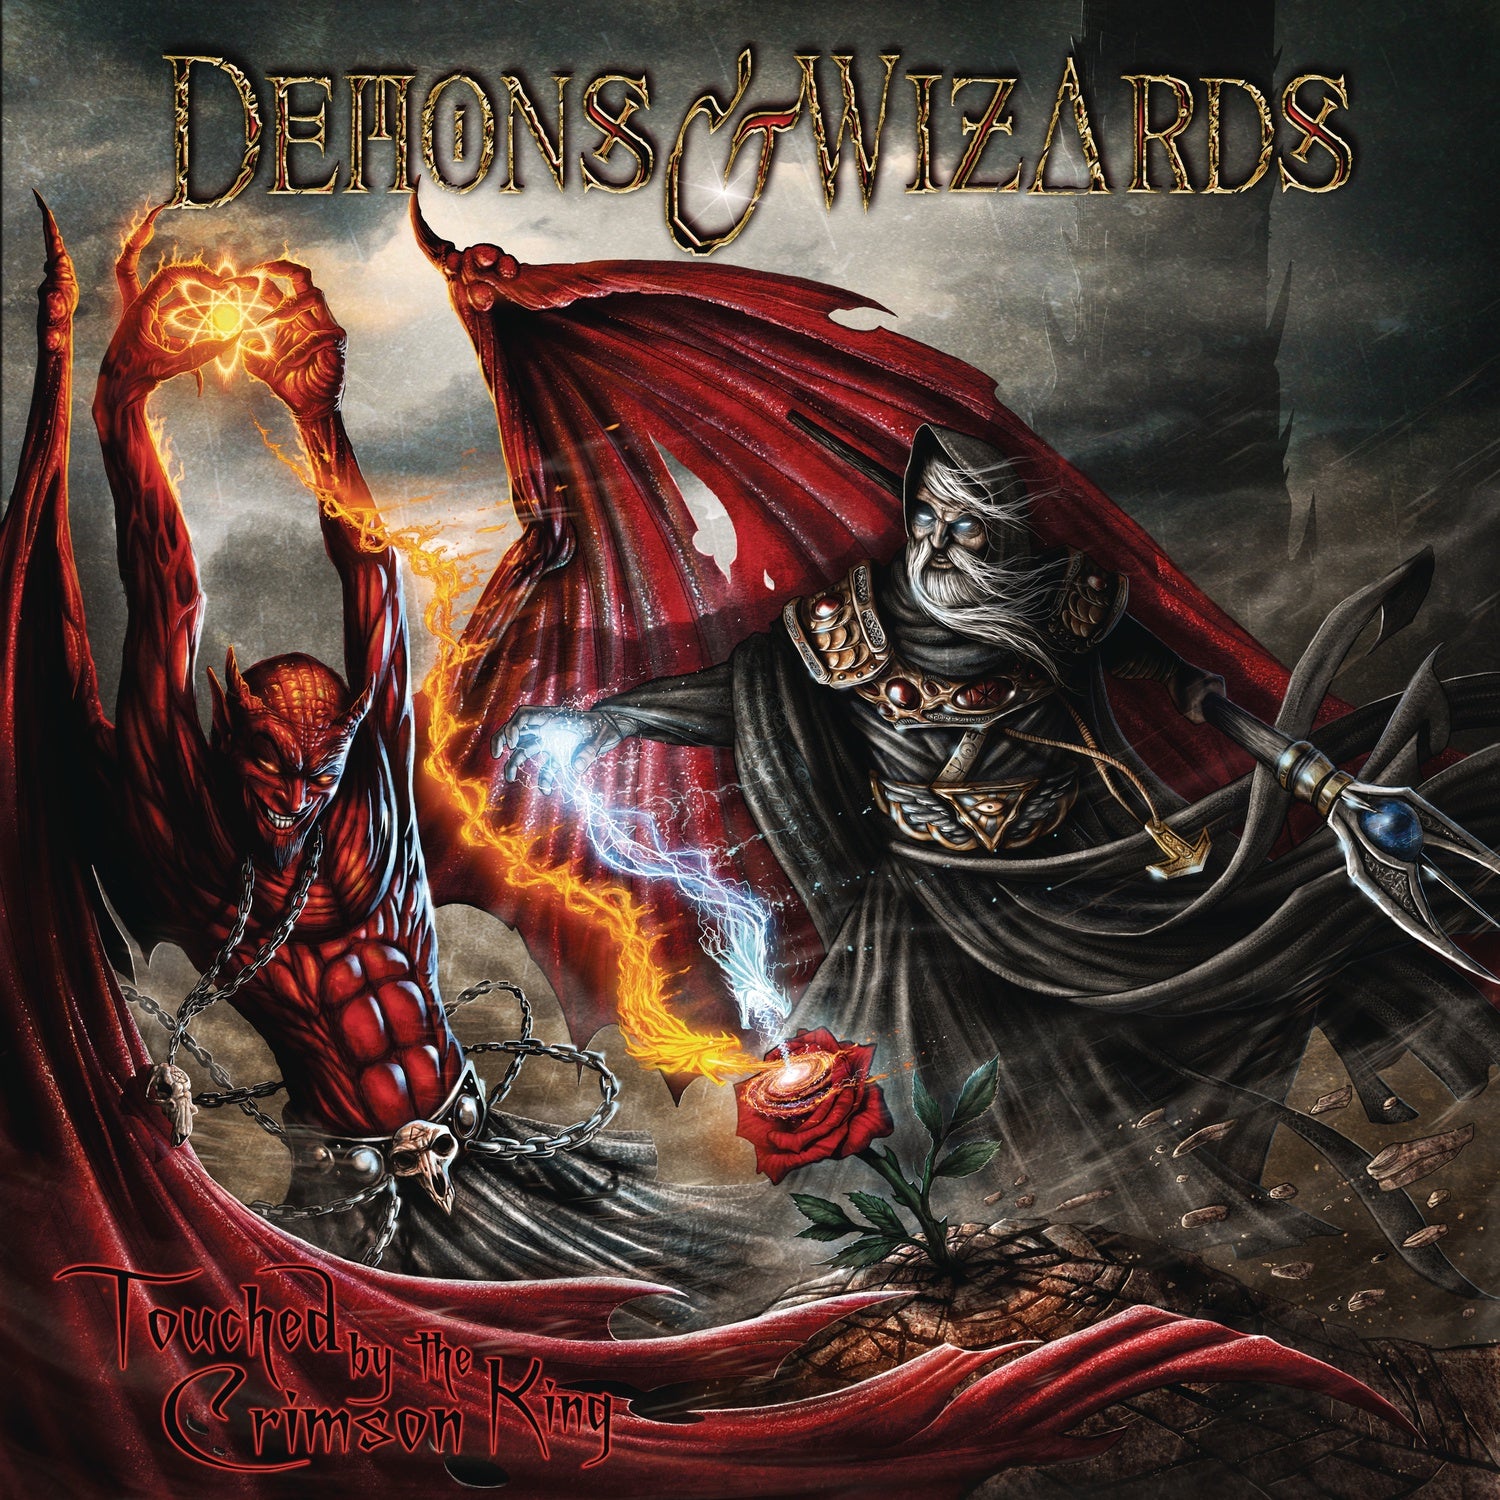 Demons & Wizards ‎– Touched By The Crimson King (2005) - New Vinyl 2 LP Record 2019 Reissue - Heavy Metal